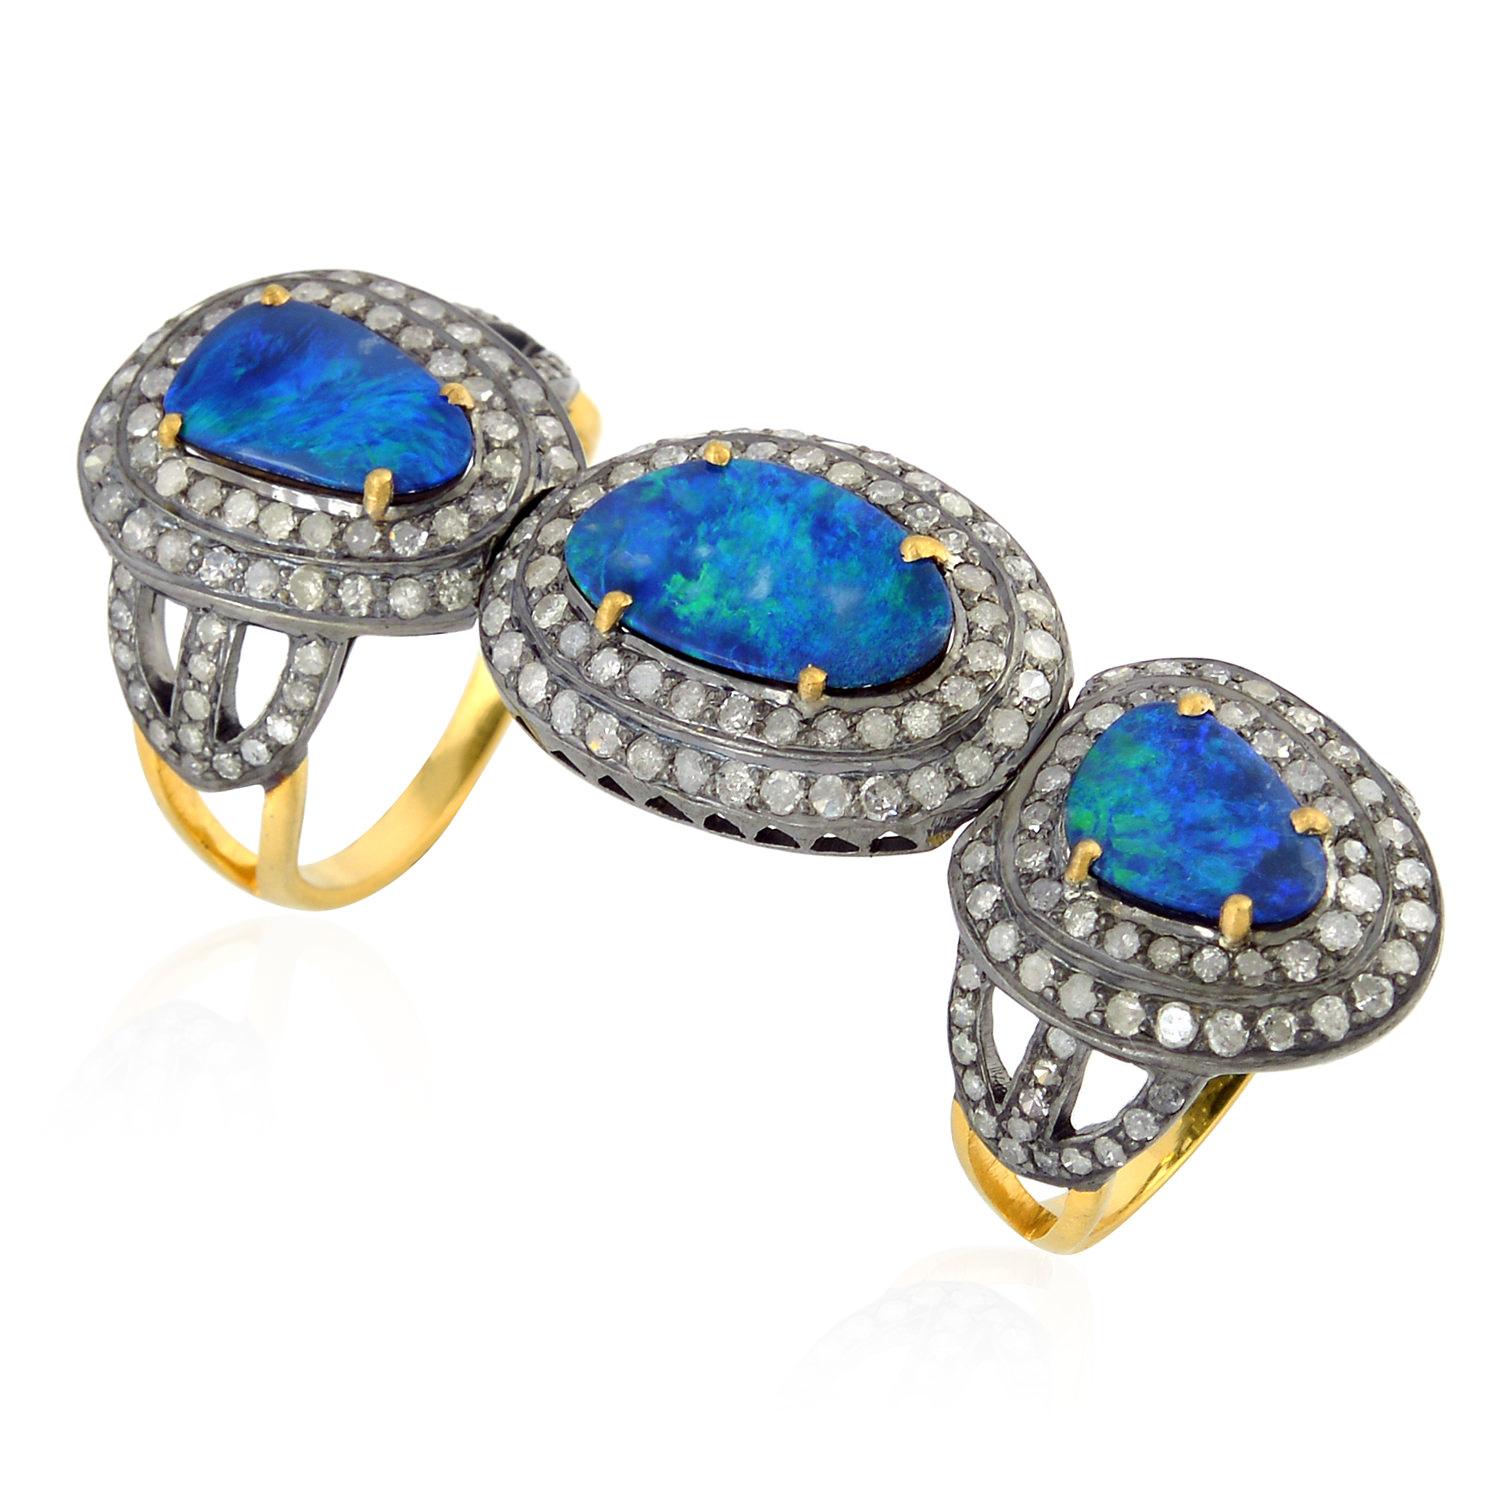 Artisan Three Tier Doublet Opal Knuckle Ring with Pave Diamonds In18k Gold & Silver For Sale